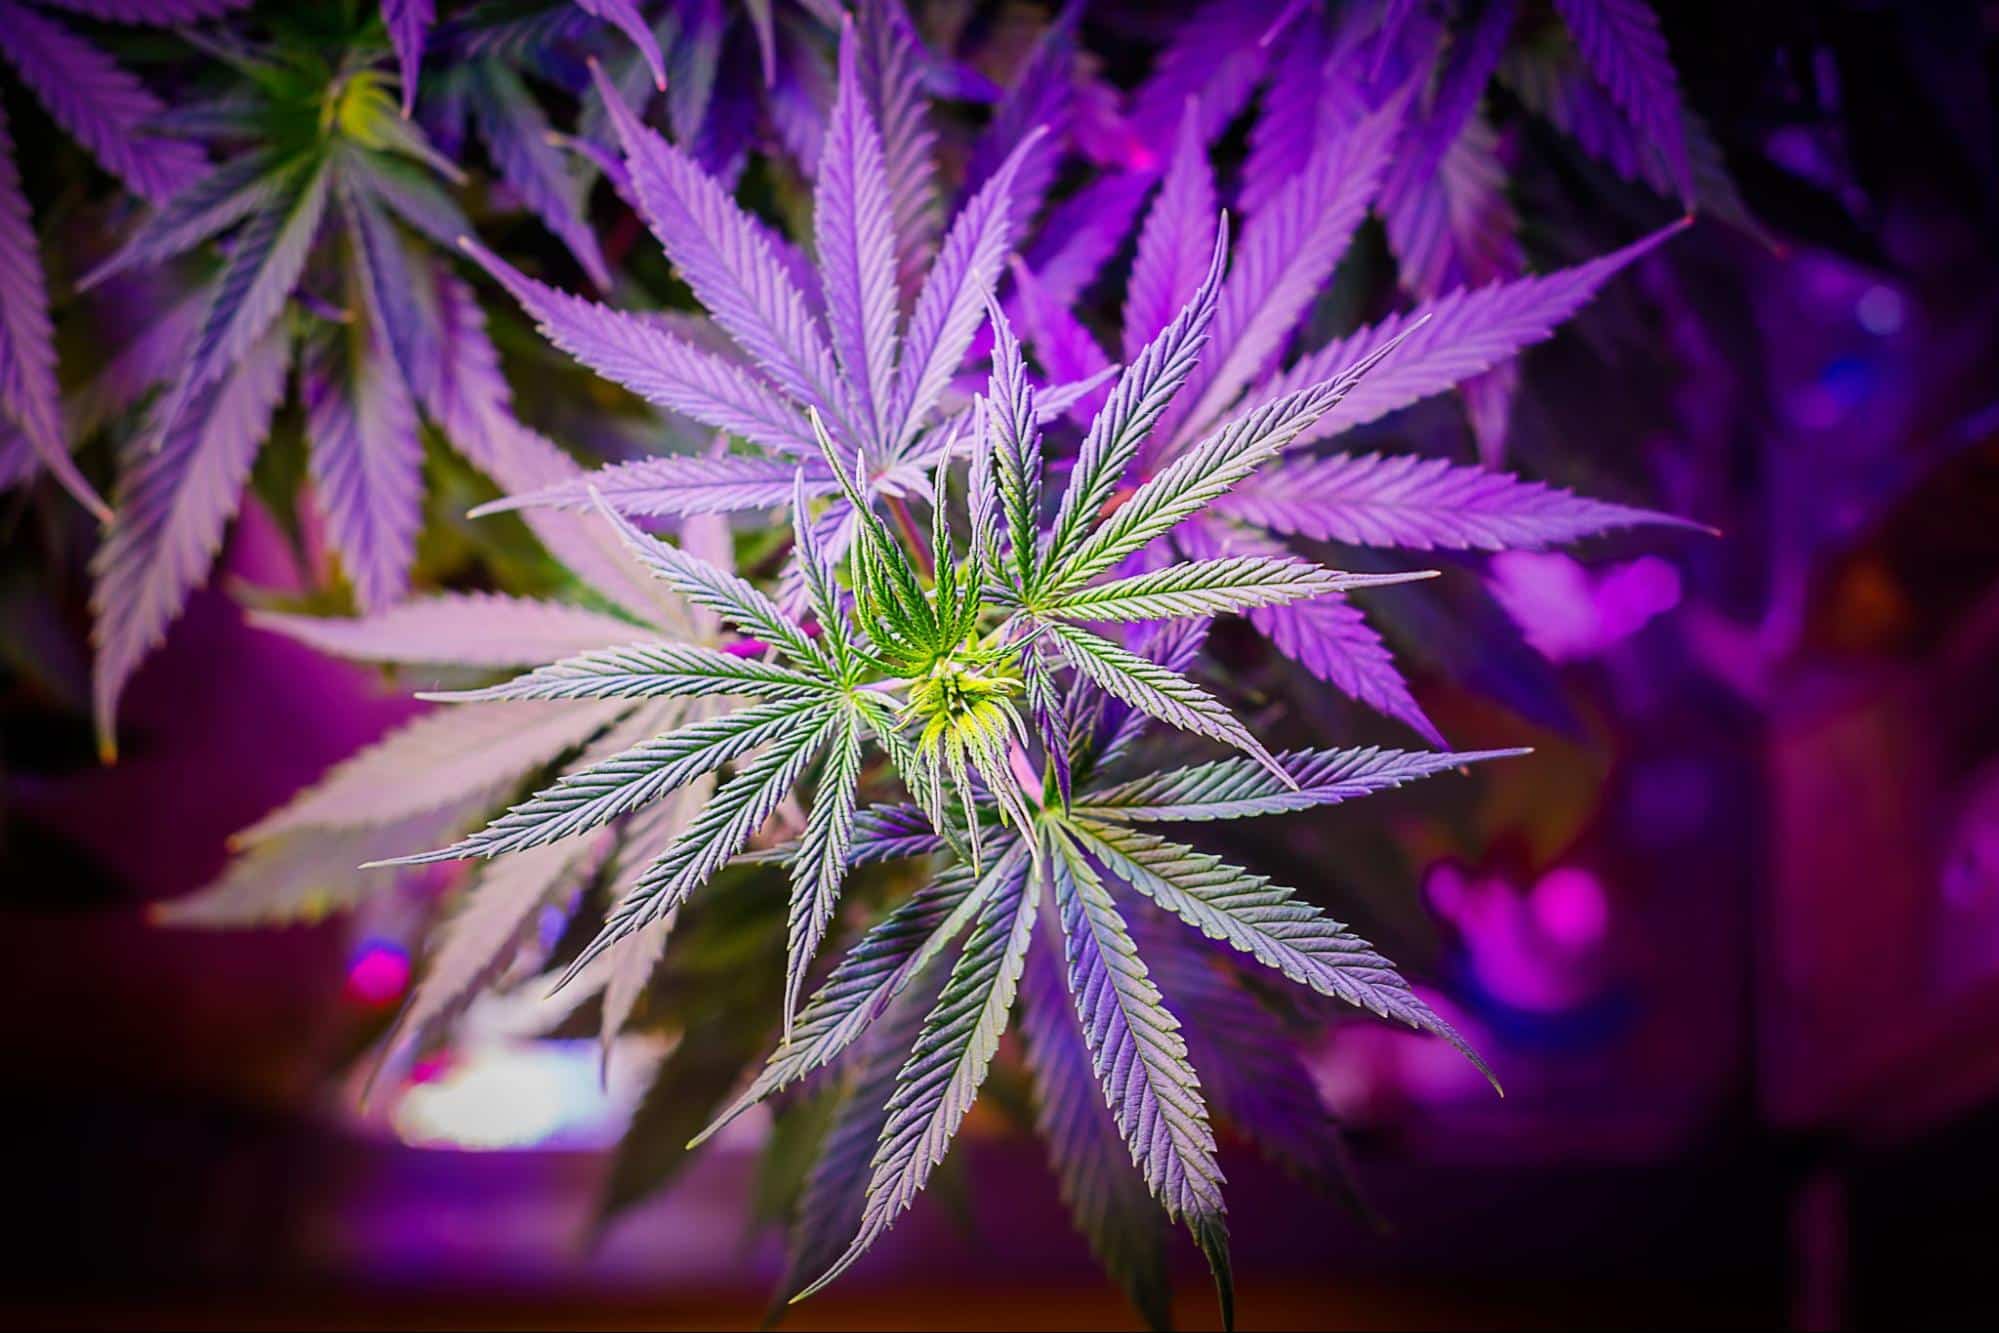 close-up view of vibrant purple cannabis leaves, highlighted by the contrasting orange hair on weed that stands out amidst the richly colored foliage